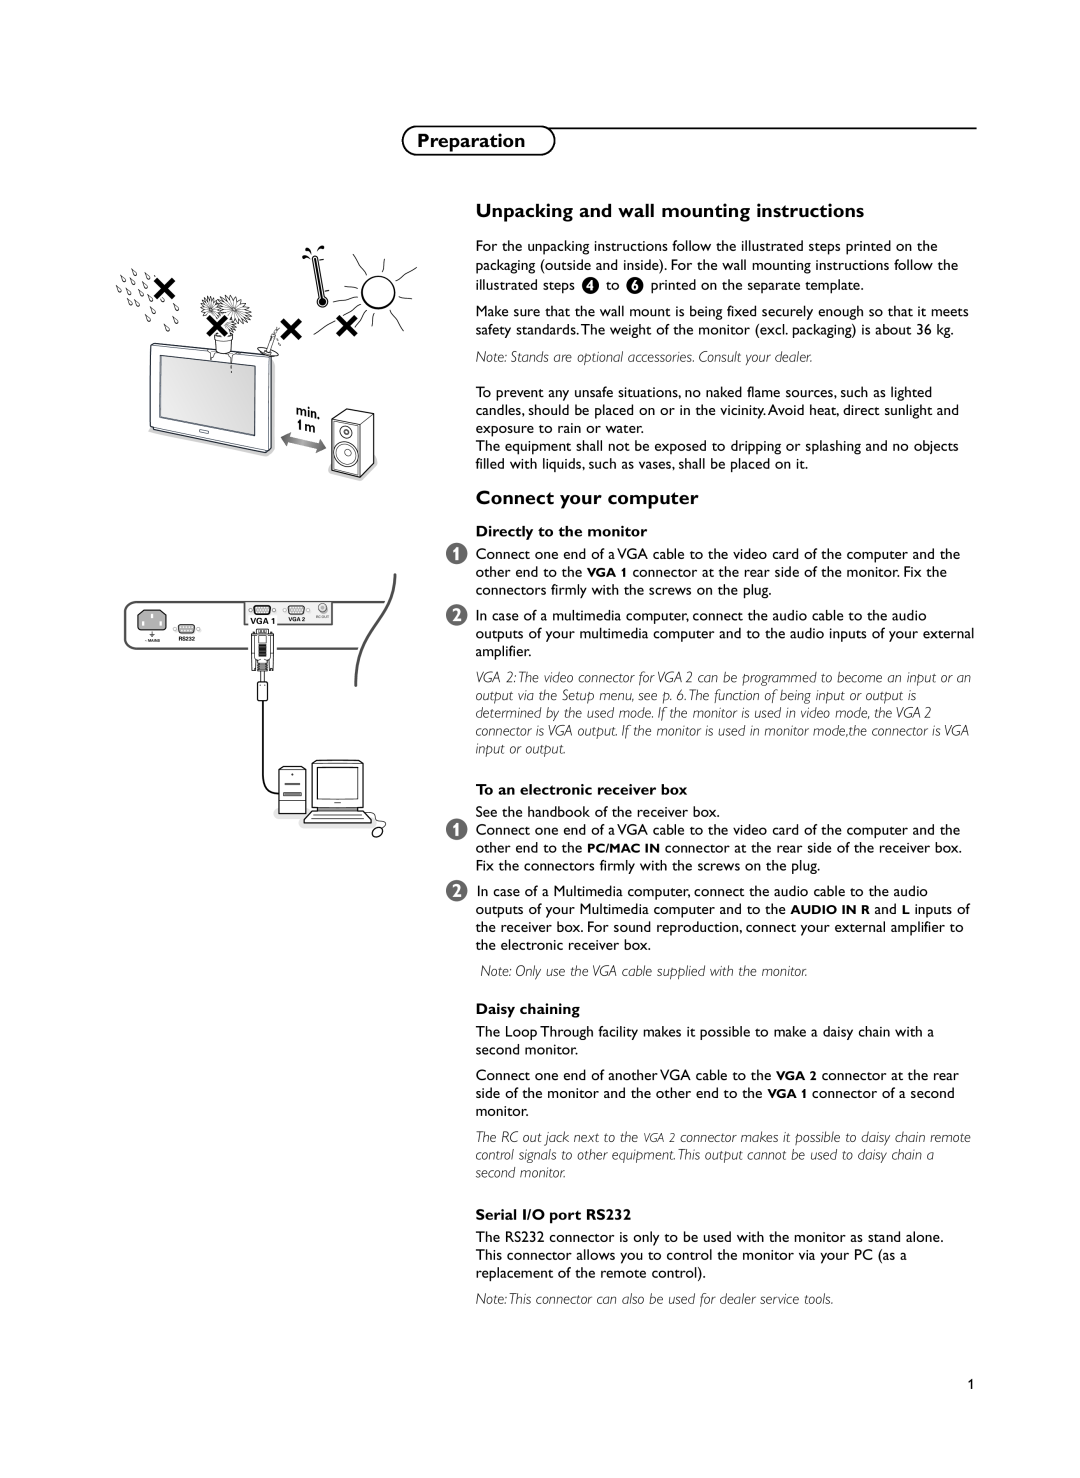 Philips RS232 manual Preparation Unpacking and wall mounting instructions, Connect your computer 